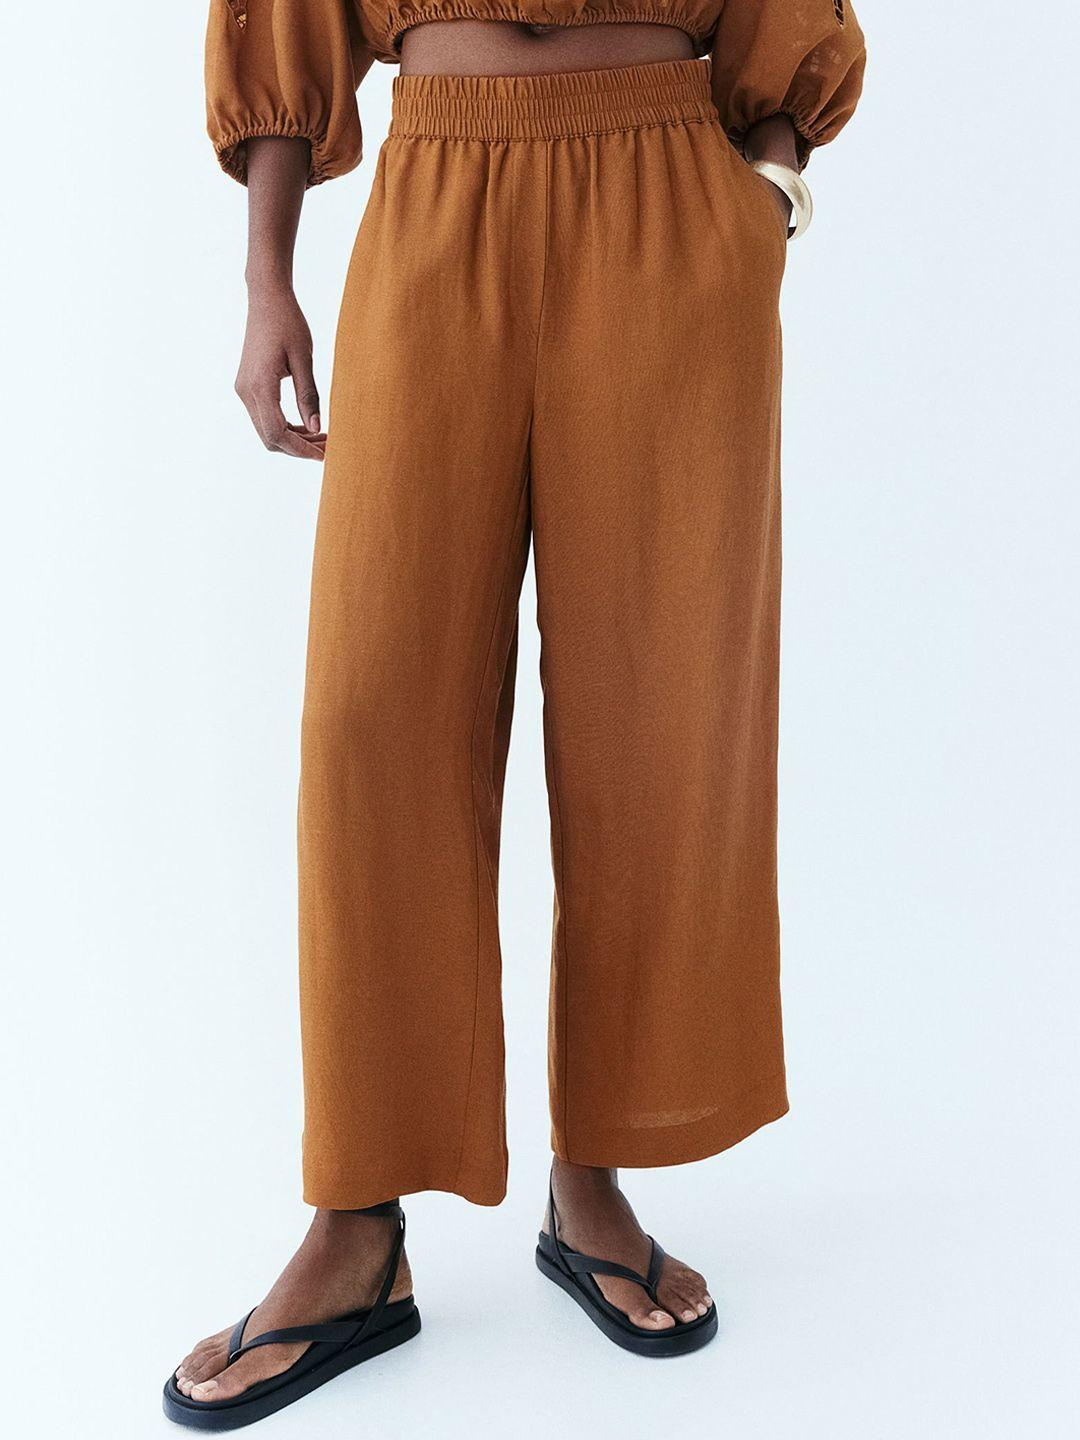 h&m loose fit trousers